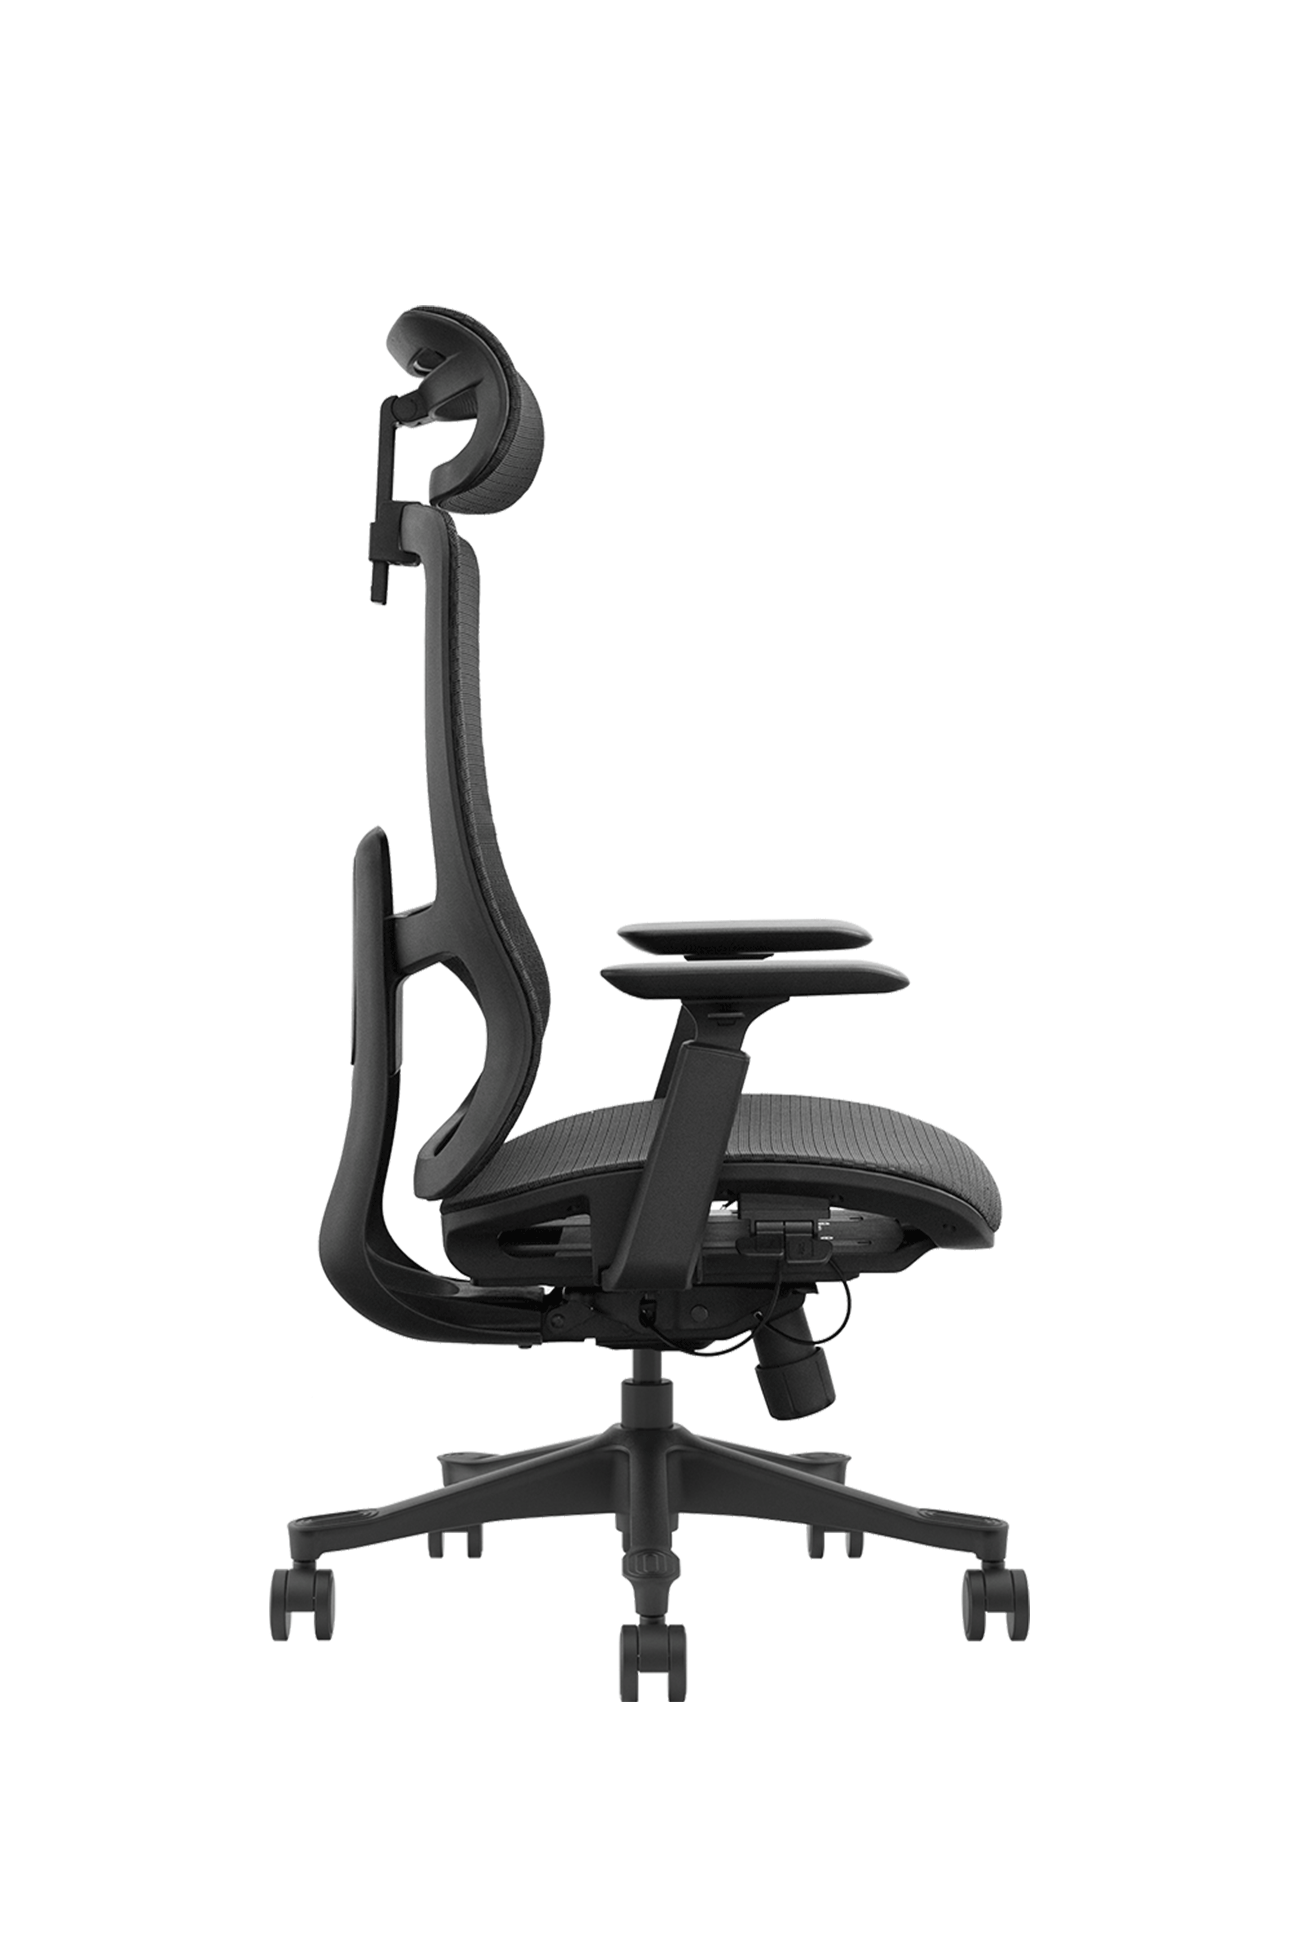 Vaseat ergonomic chair for tall person T3-BH-01